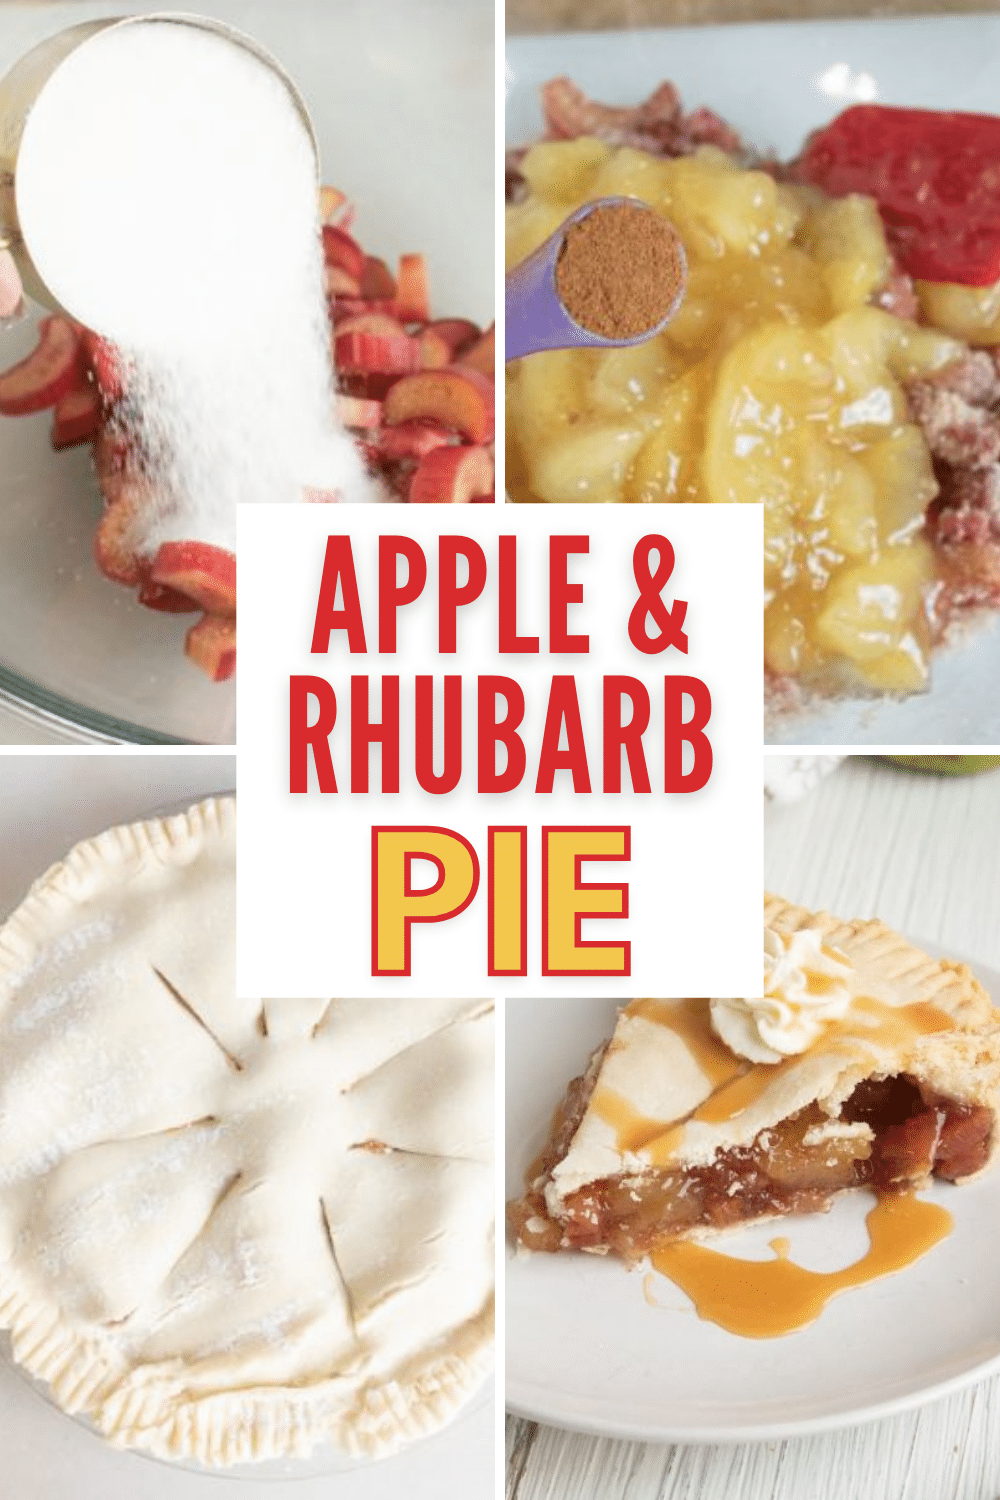 Apple and Rhubarb Pie is the perfect dessert for fall and Thanksgiving. This delicious pie is full of fruit and flavor and looks amazing on your table. #apples #rhubarb #pie via @wondermomwannab